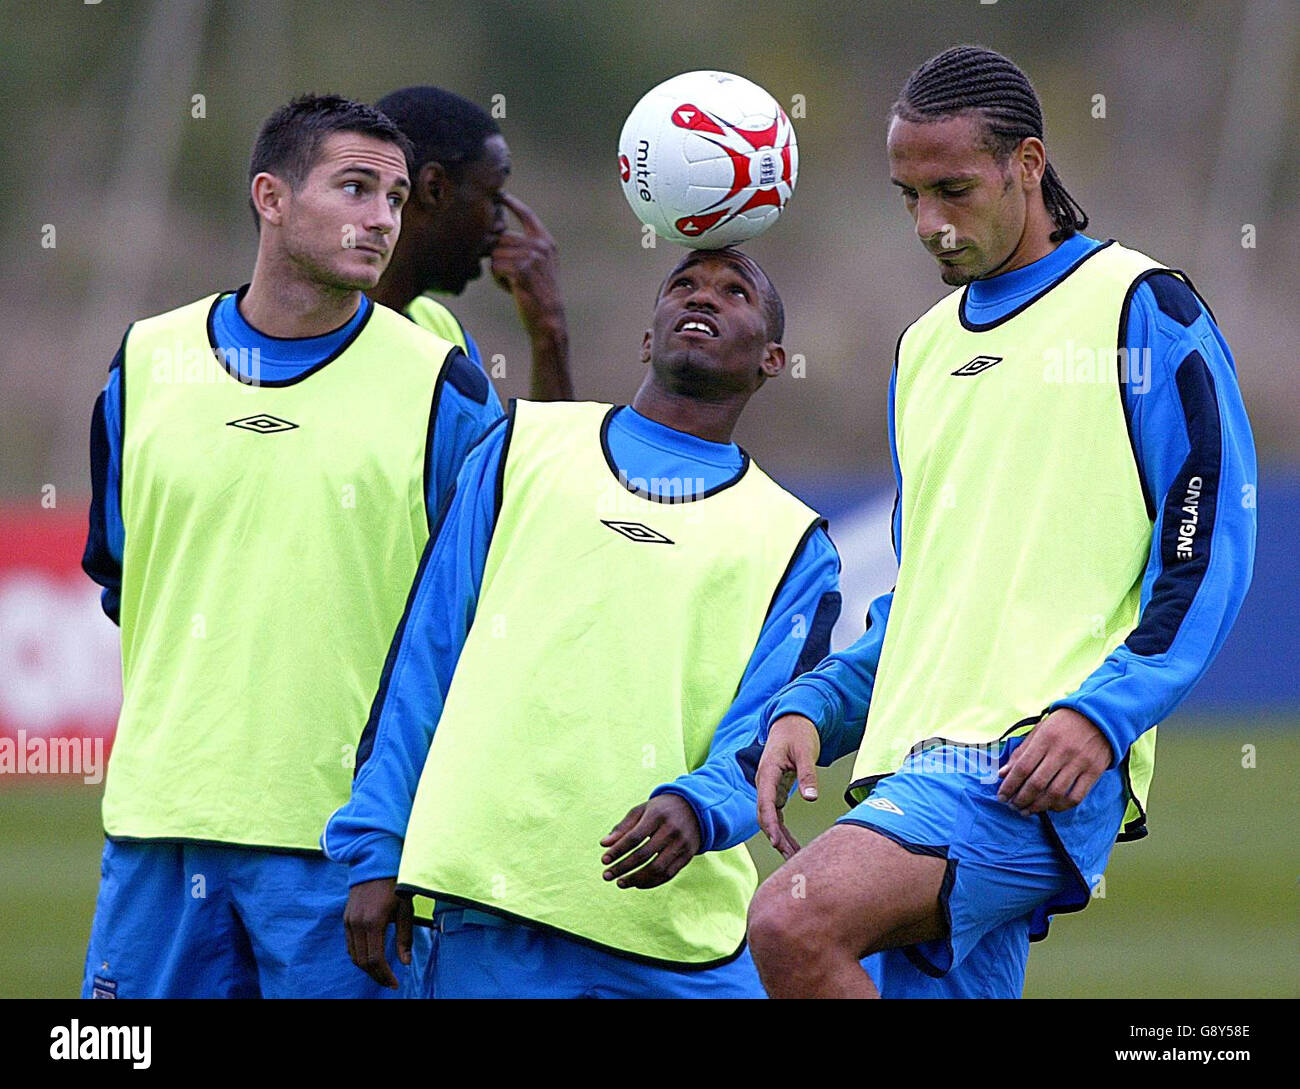 England's (from L-R) Frank Lampard, Jermain Defoe and Rio Ferdinand during a training session at Carrington Training Ground, Manchester, Tuesday October 4, 2005. England play Austria in their World Cup qualifying match on Saturday. PRESS ASSOCIATION Photo. Photo credit should read: Martin Rickett/PA. Stock Photo